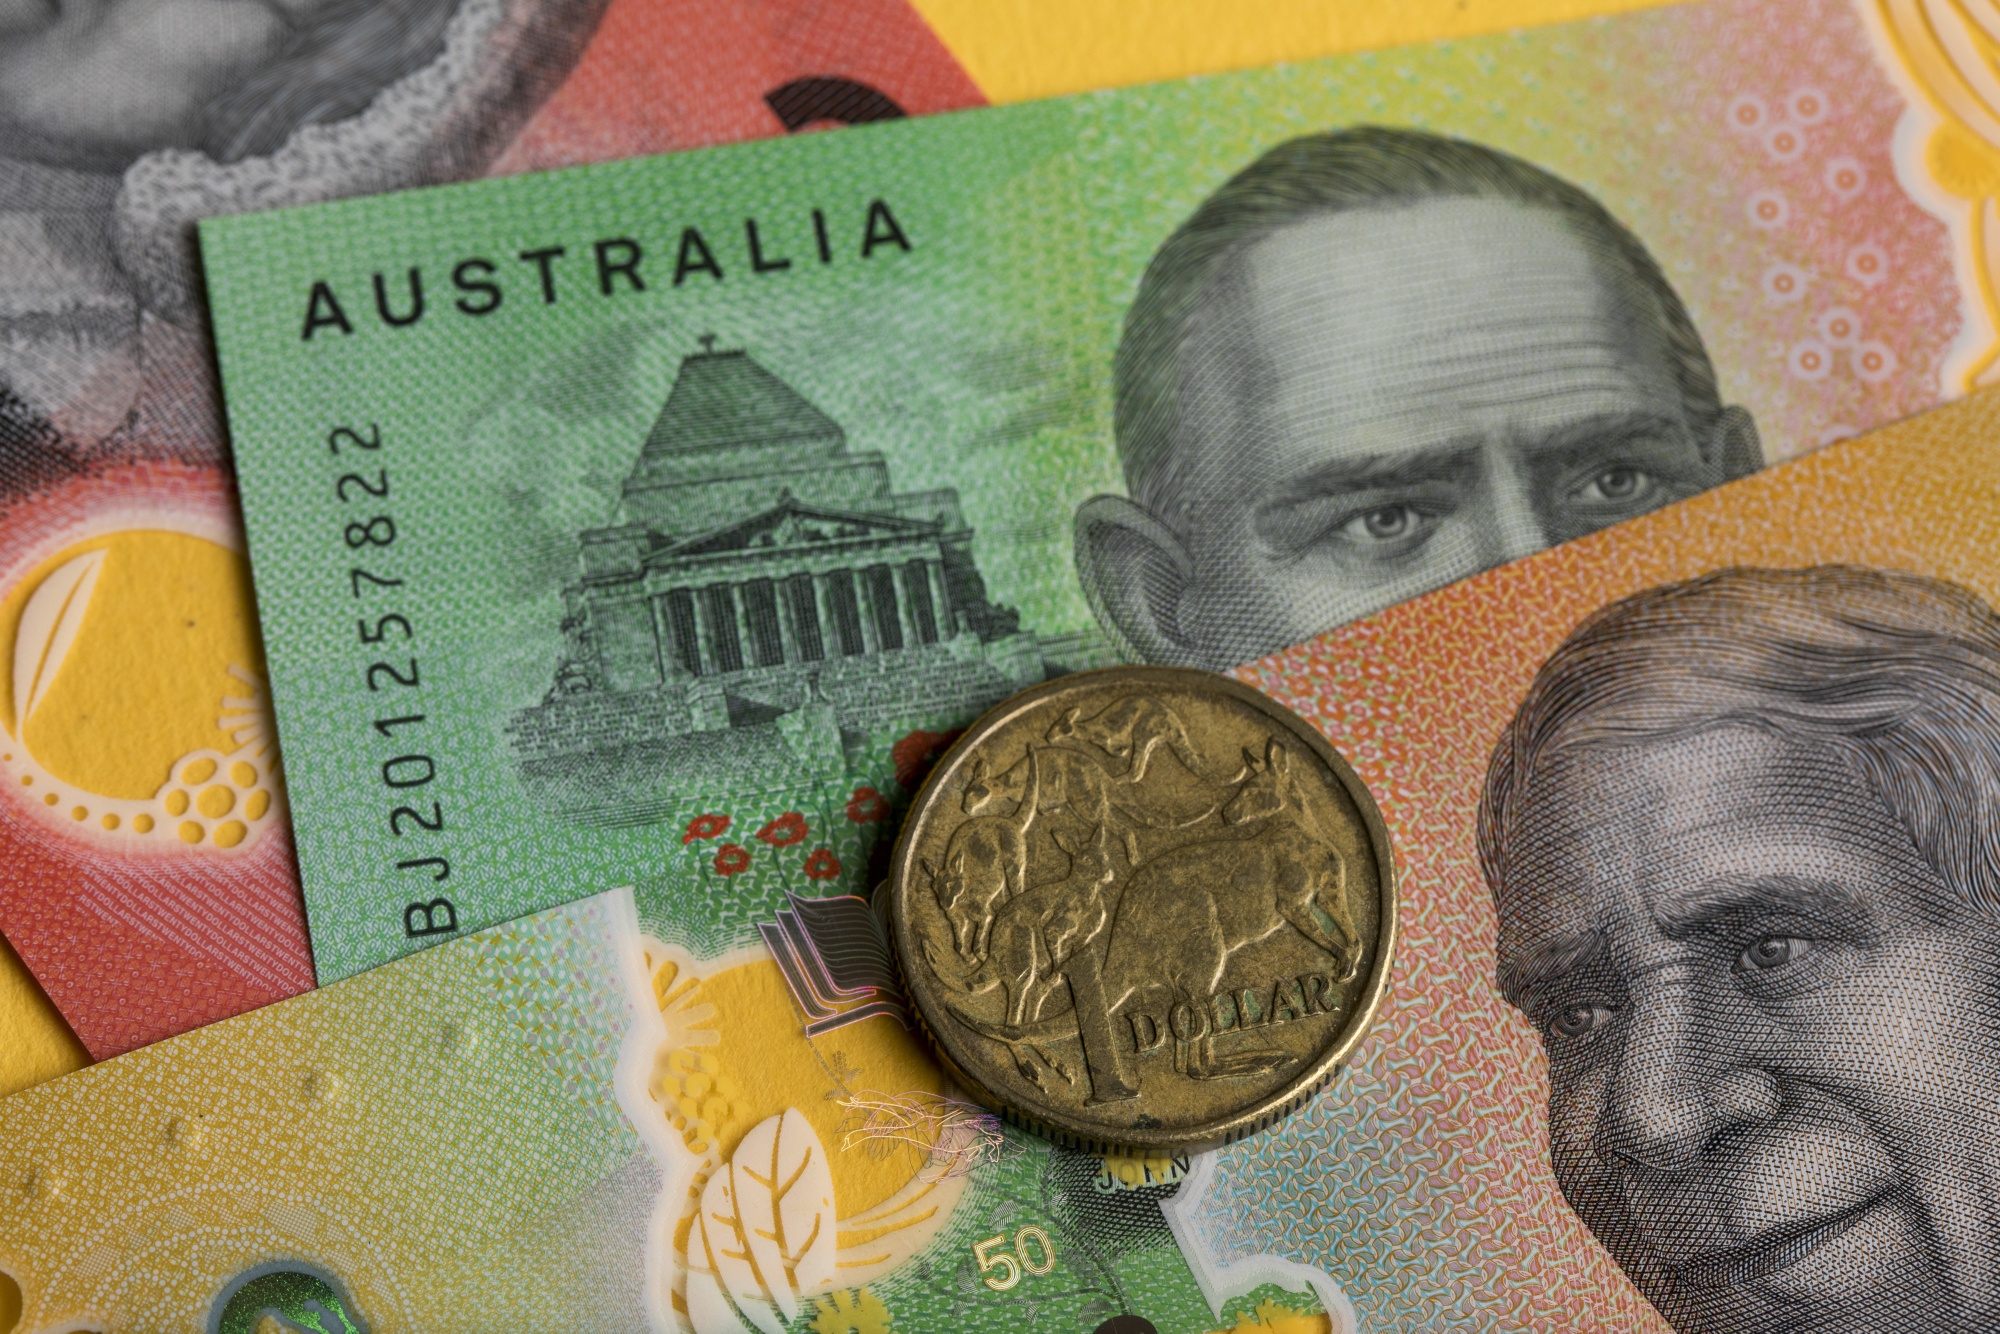 Aussies hoping bonds will pay equity-like returns